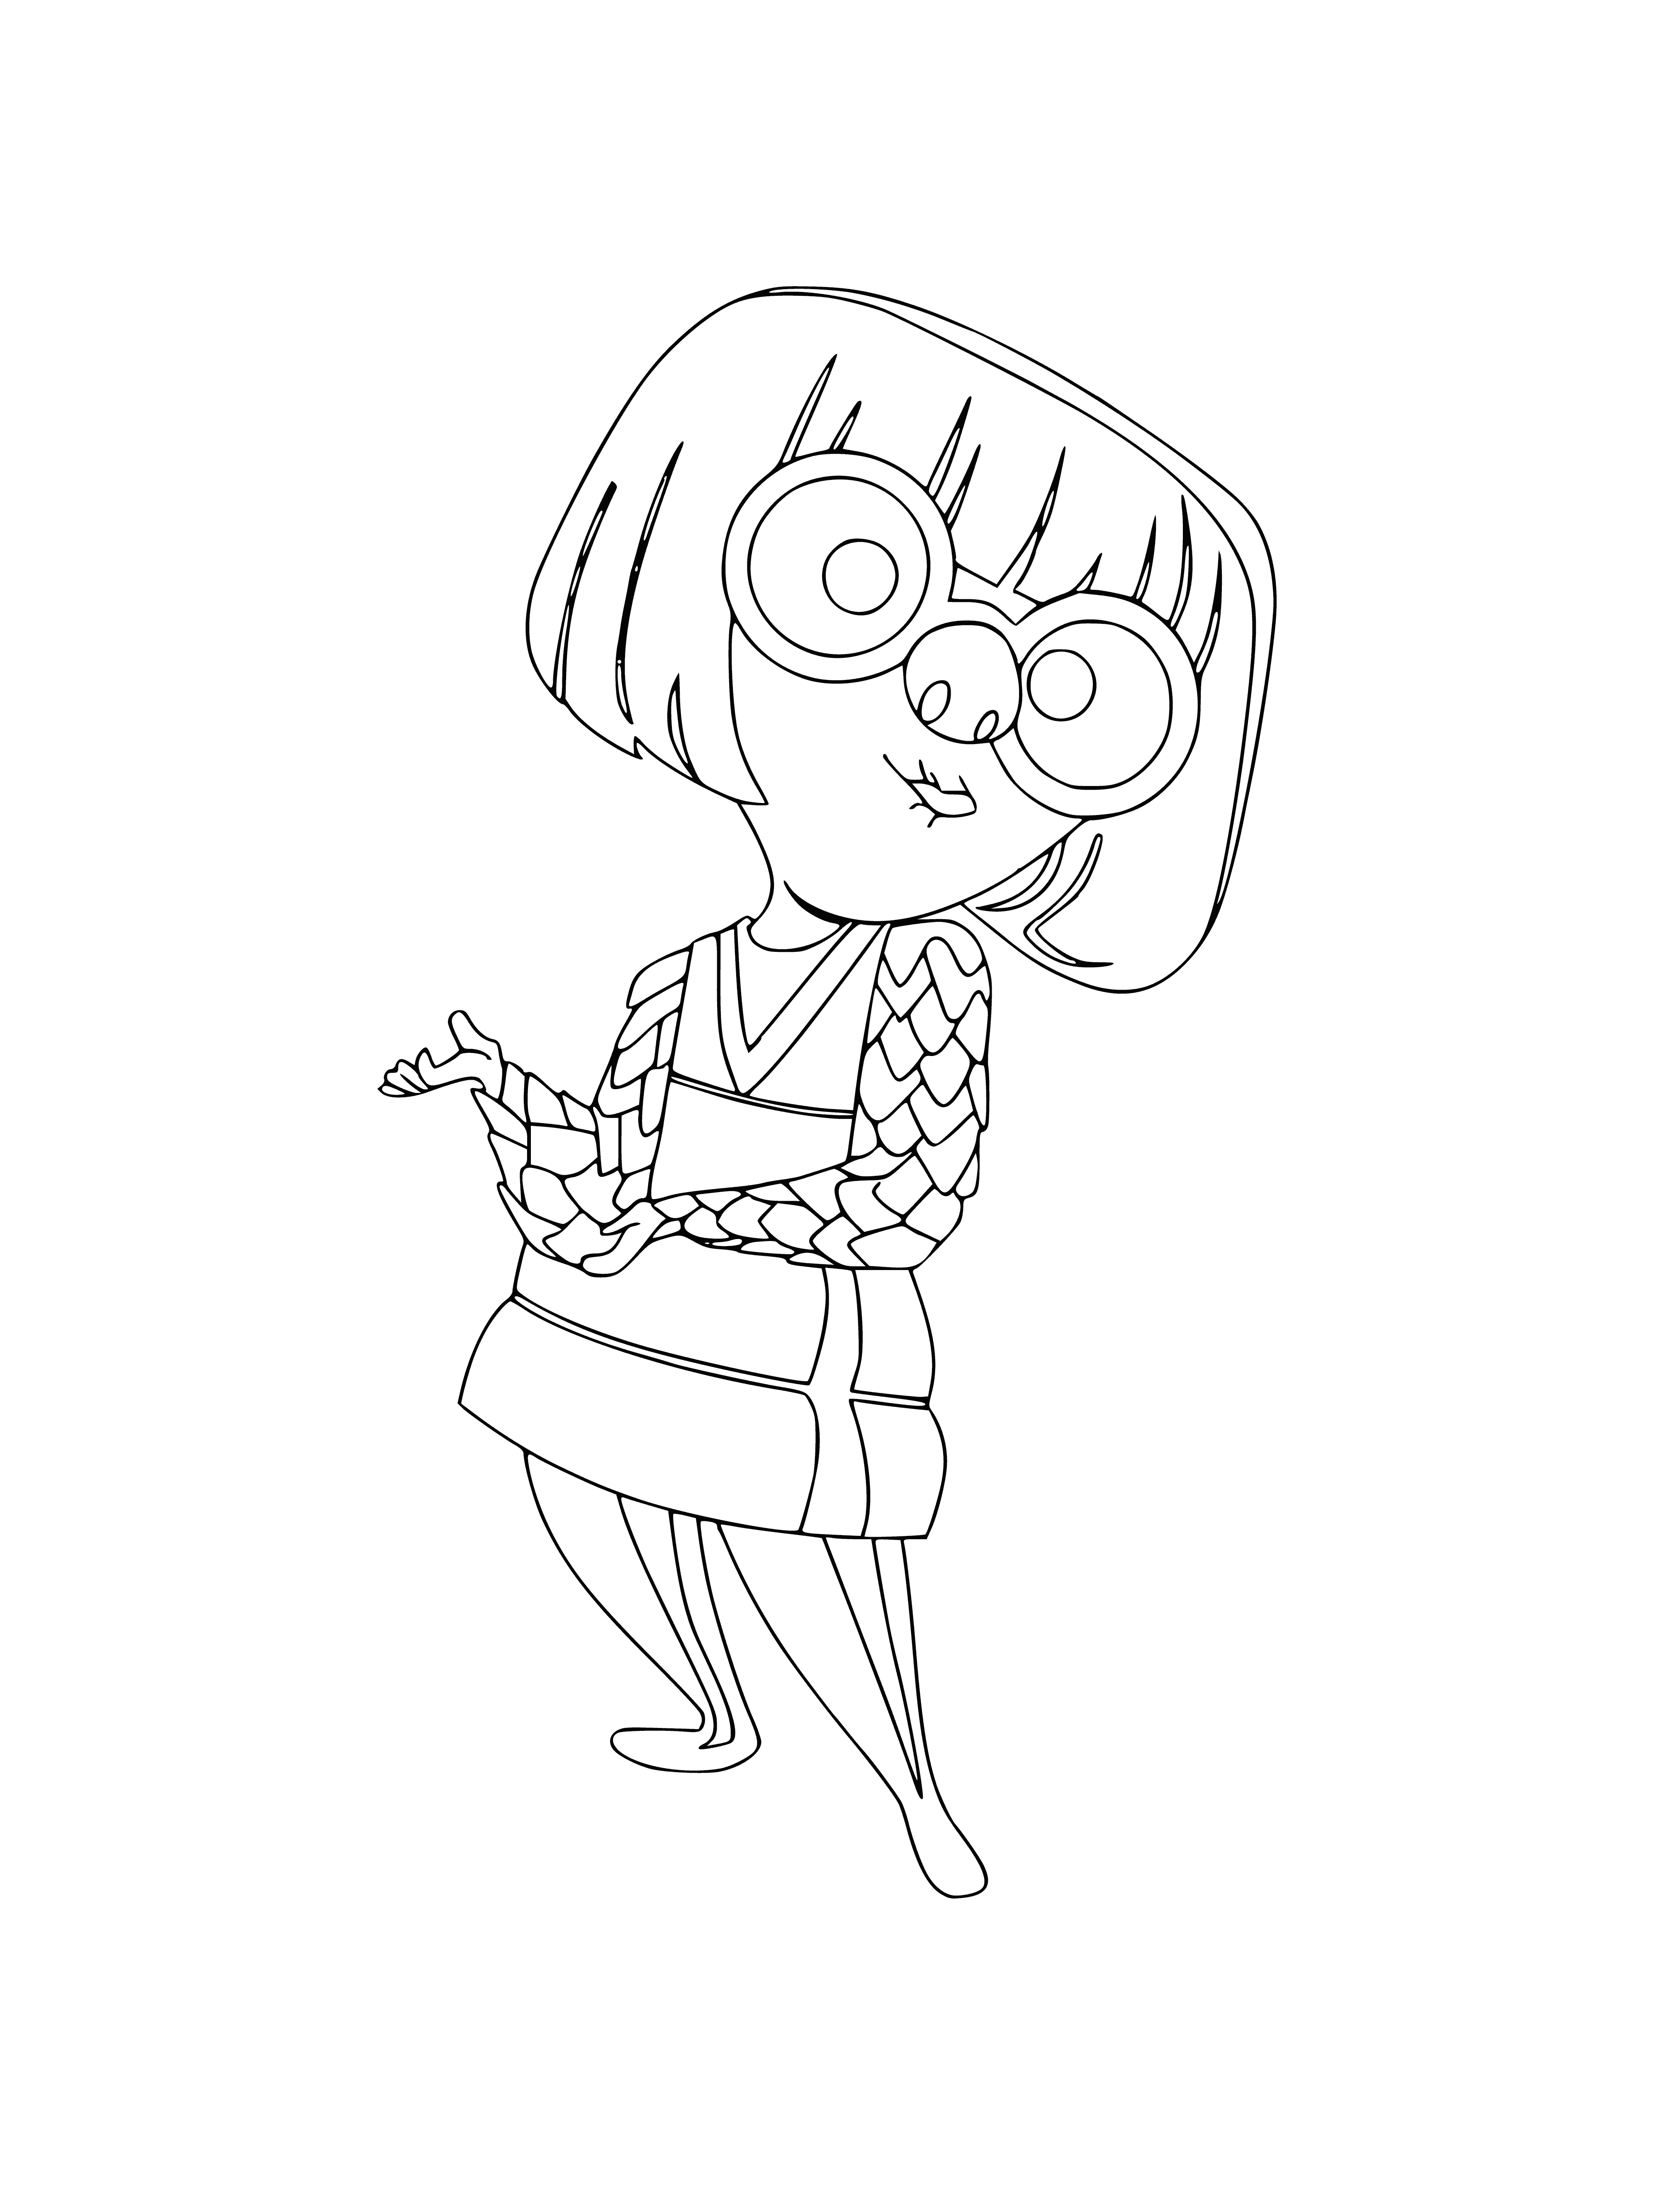 Edna Mod coloring page